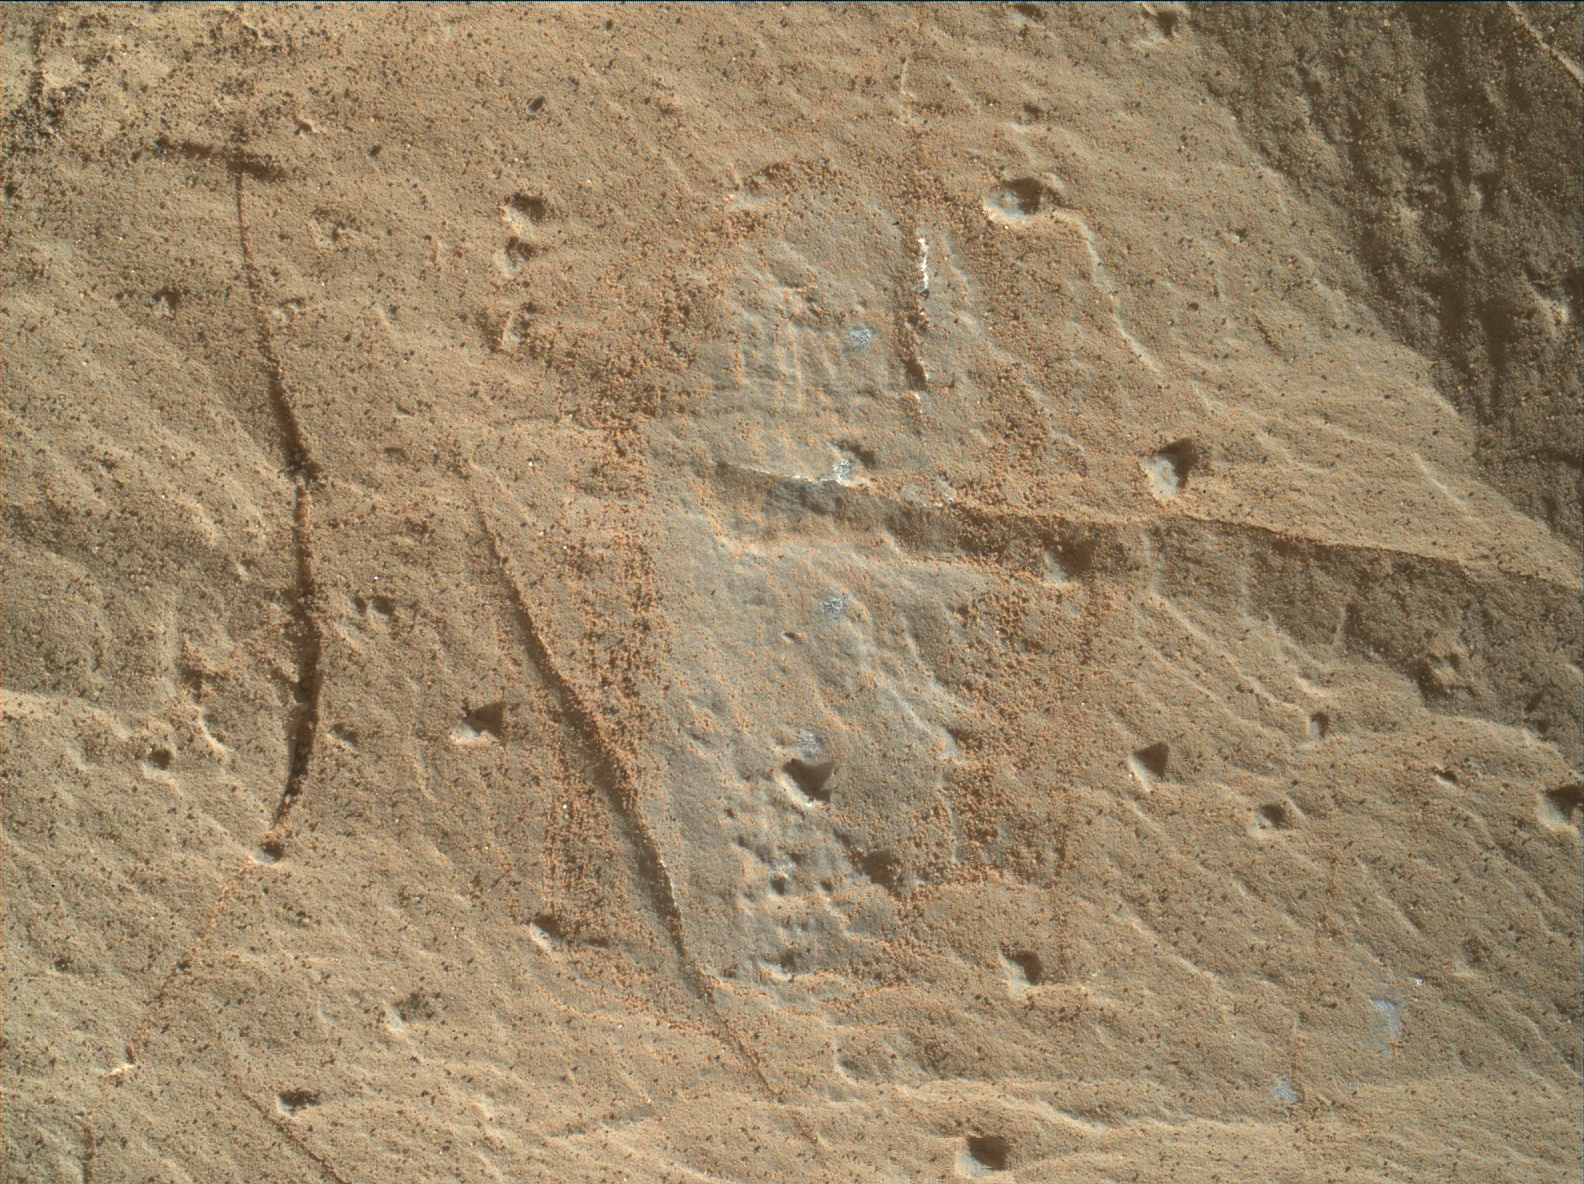 Nasa's Mars rover Curiosity acquired this image using its Mars Hand Lens Imager (MAHLI) on Sol 1905